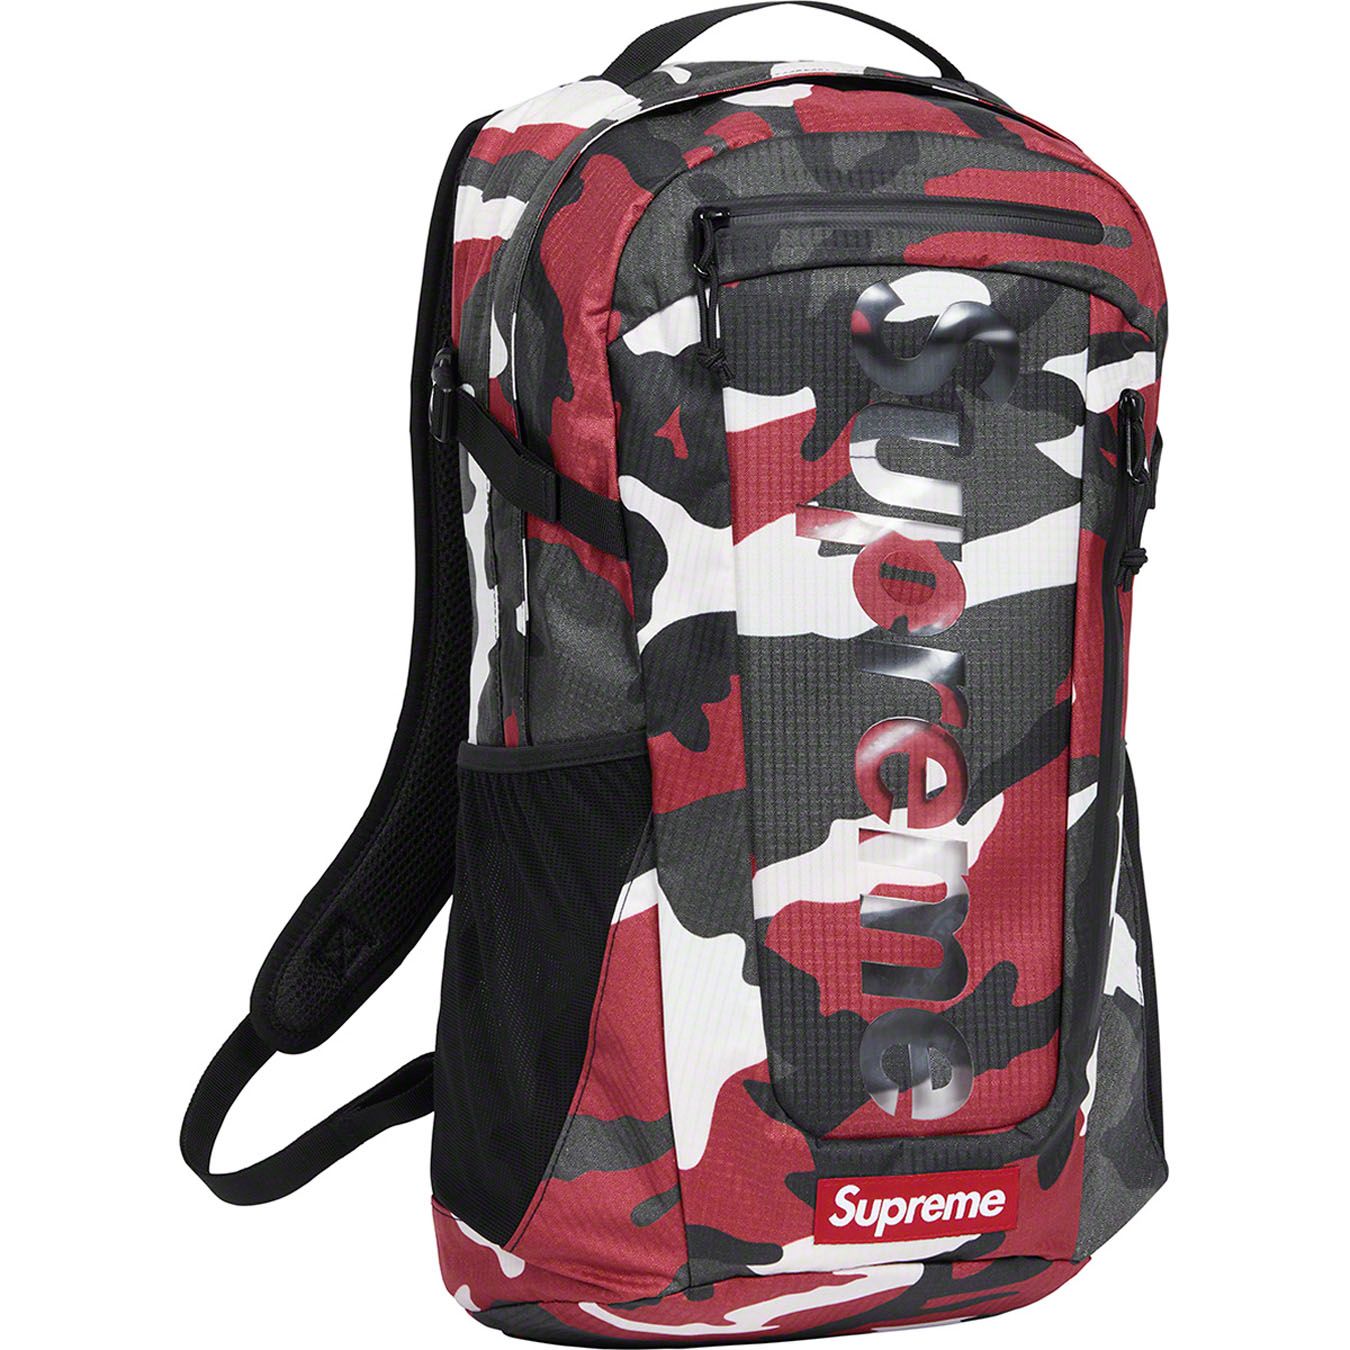  Supreme Backpack SS21 - Red Camo 